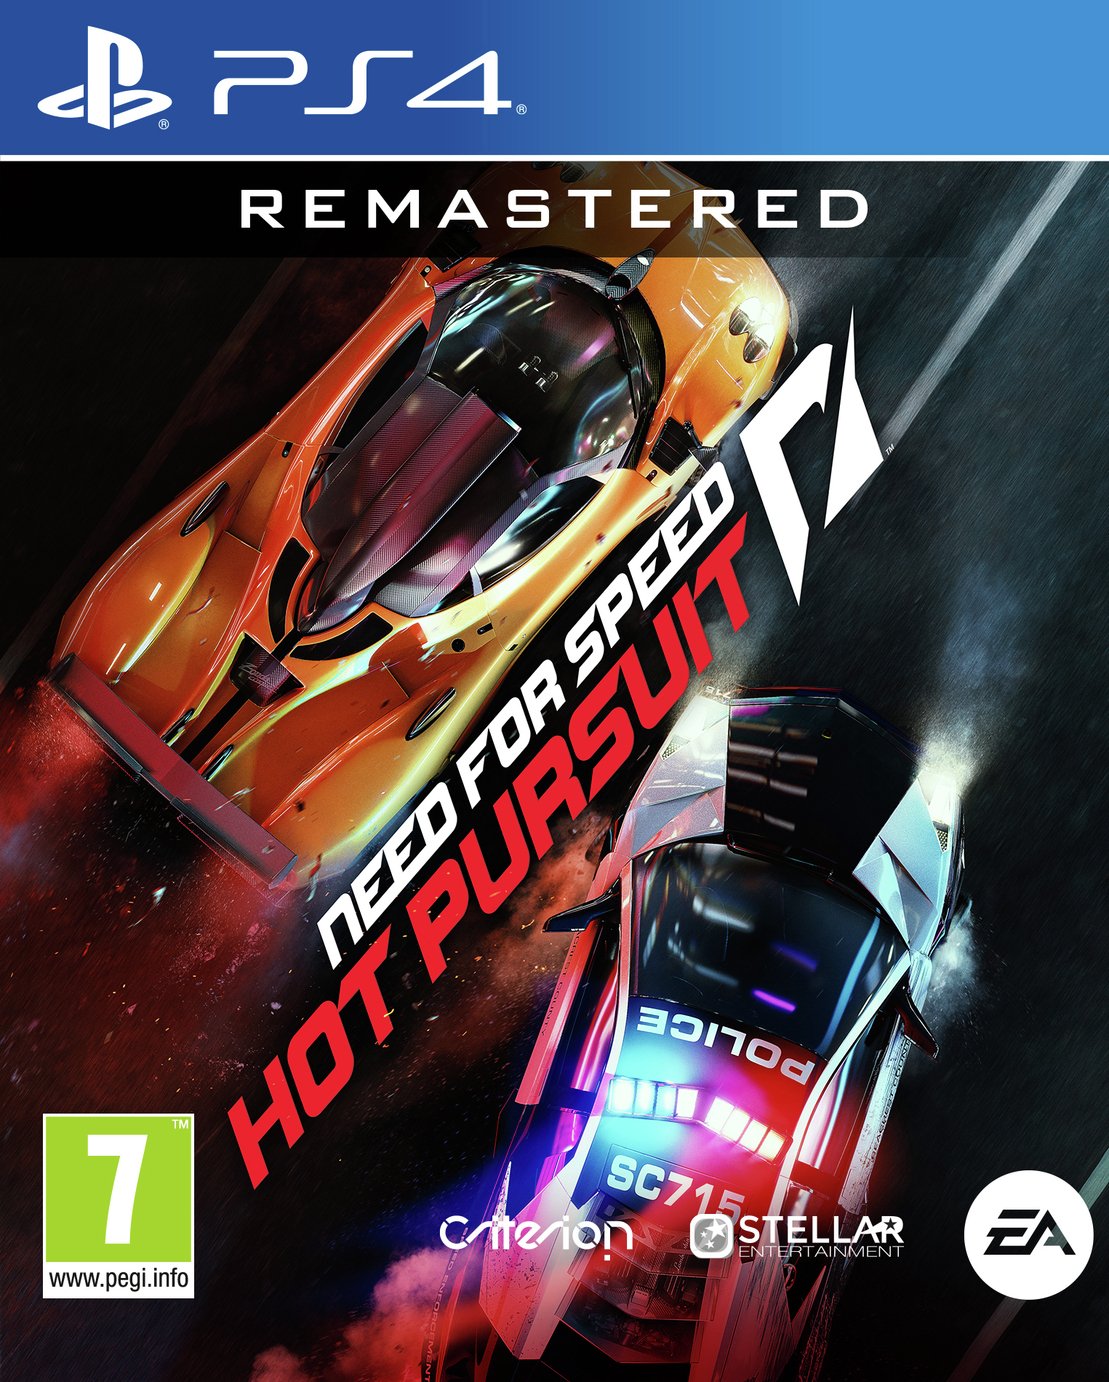 need for speed ps4 games